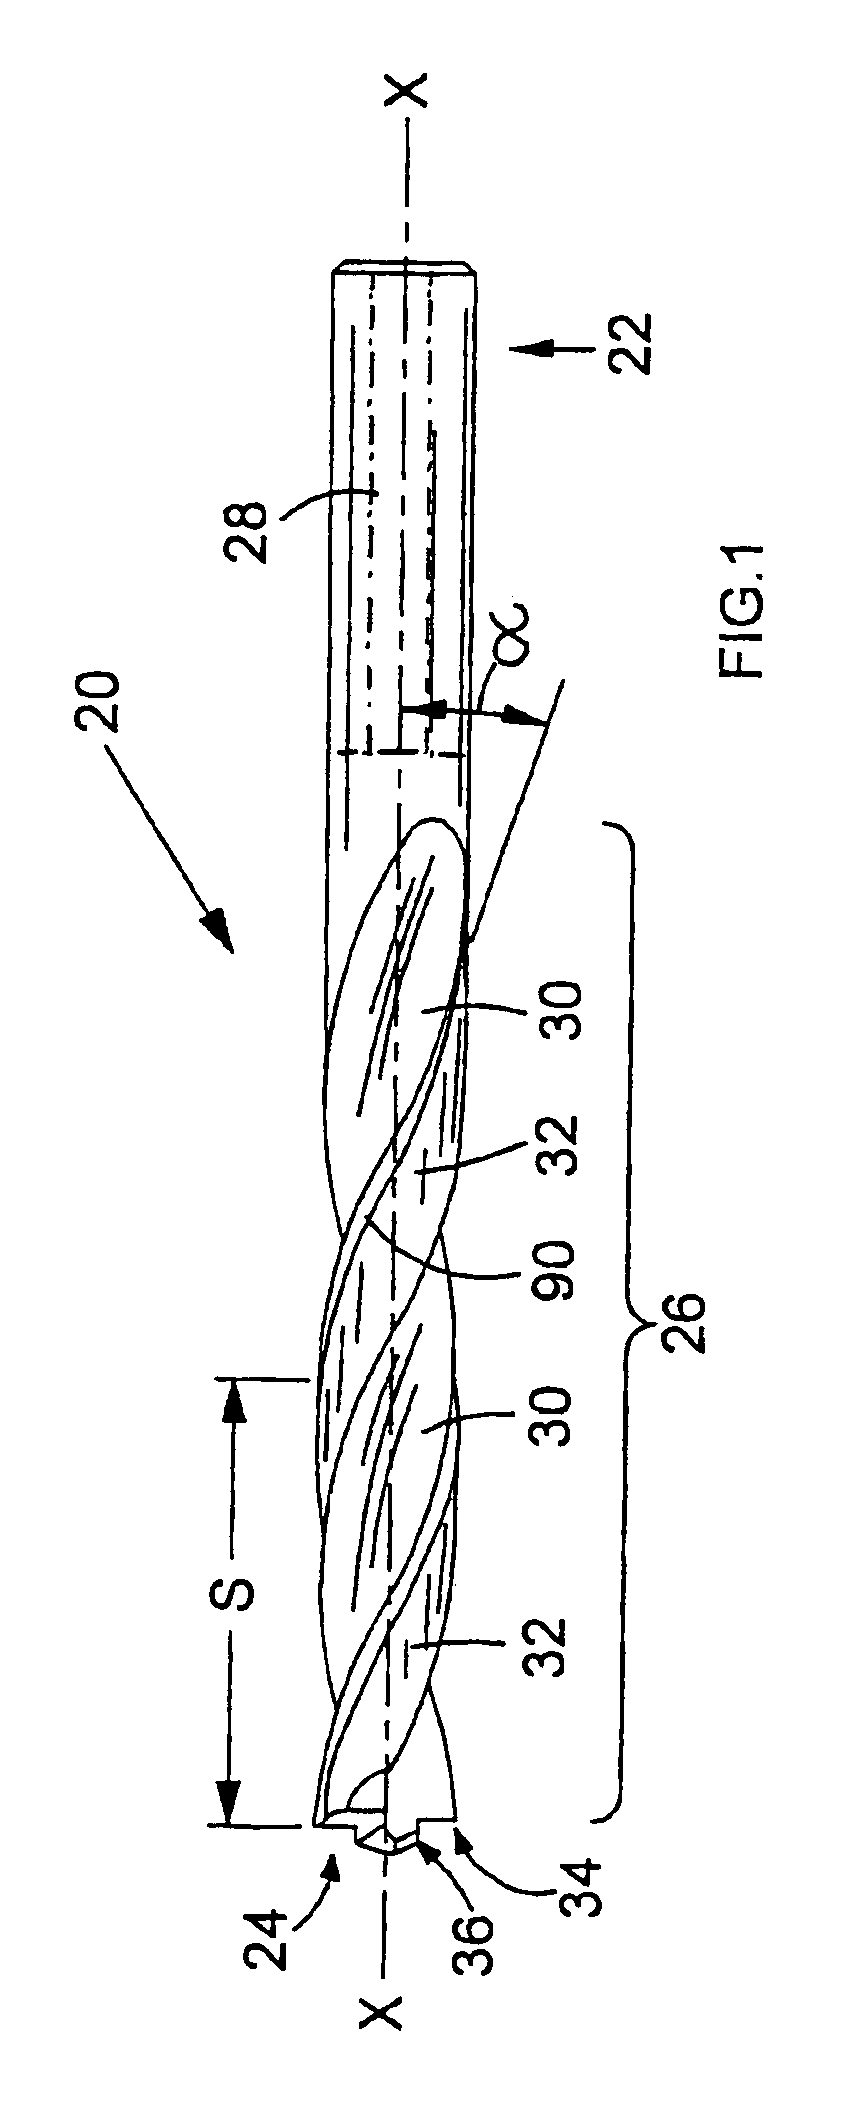 Self-centering drill bit with pilot tip